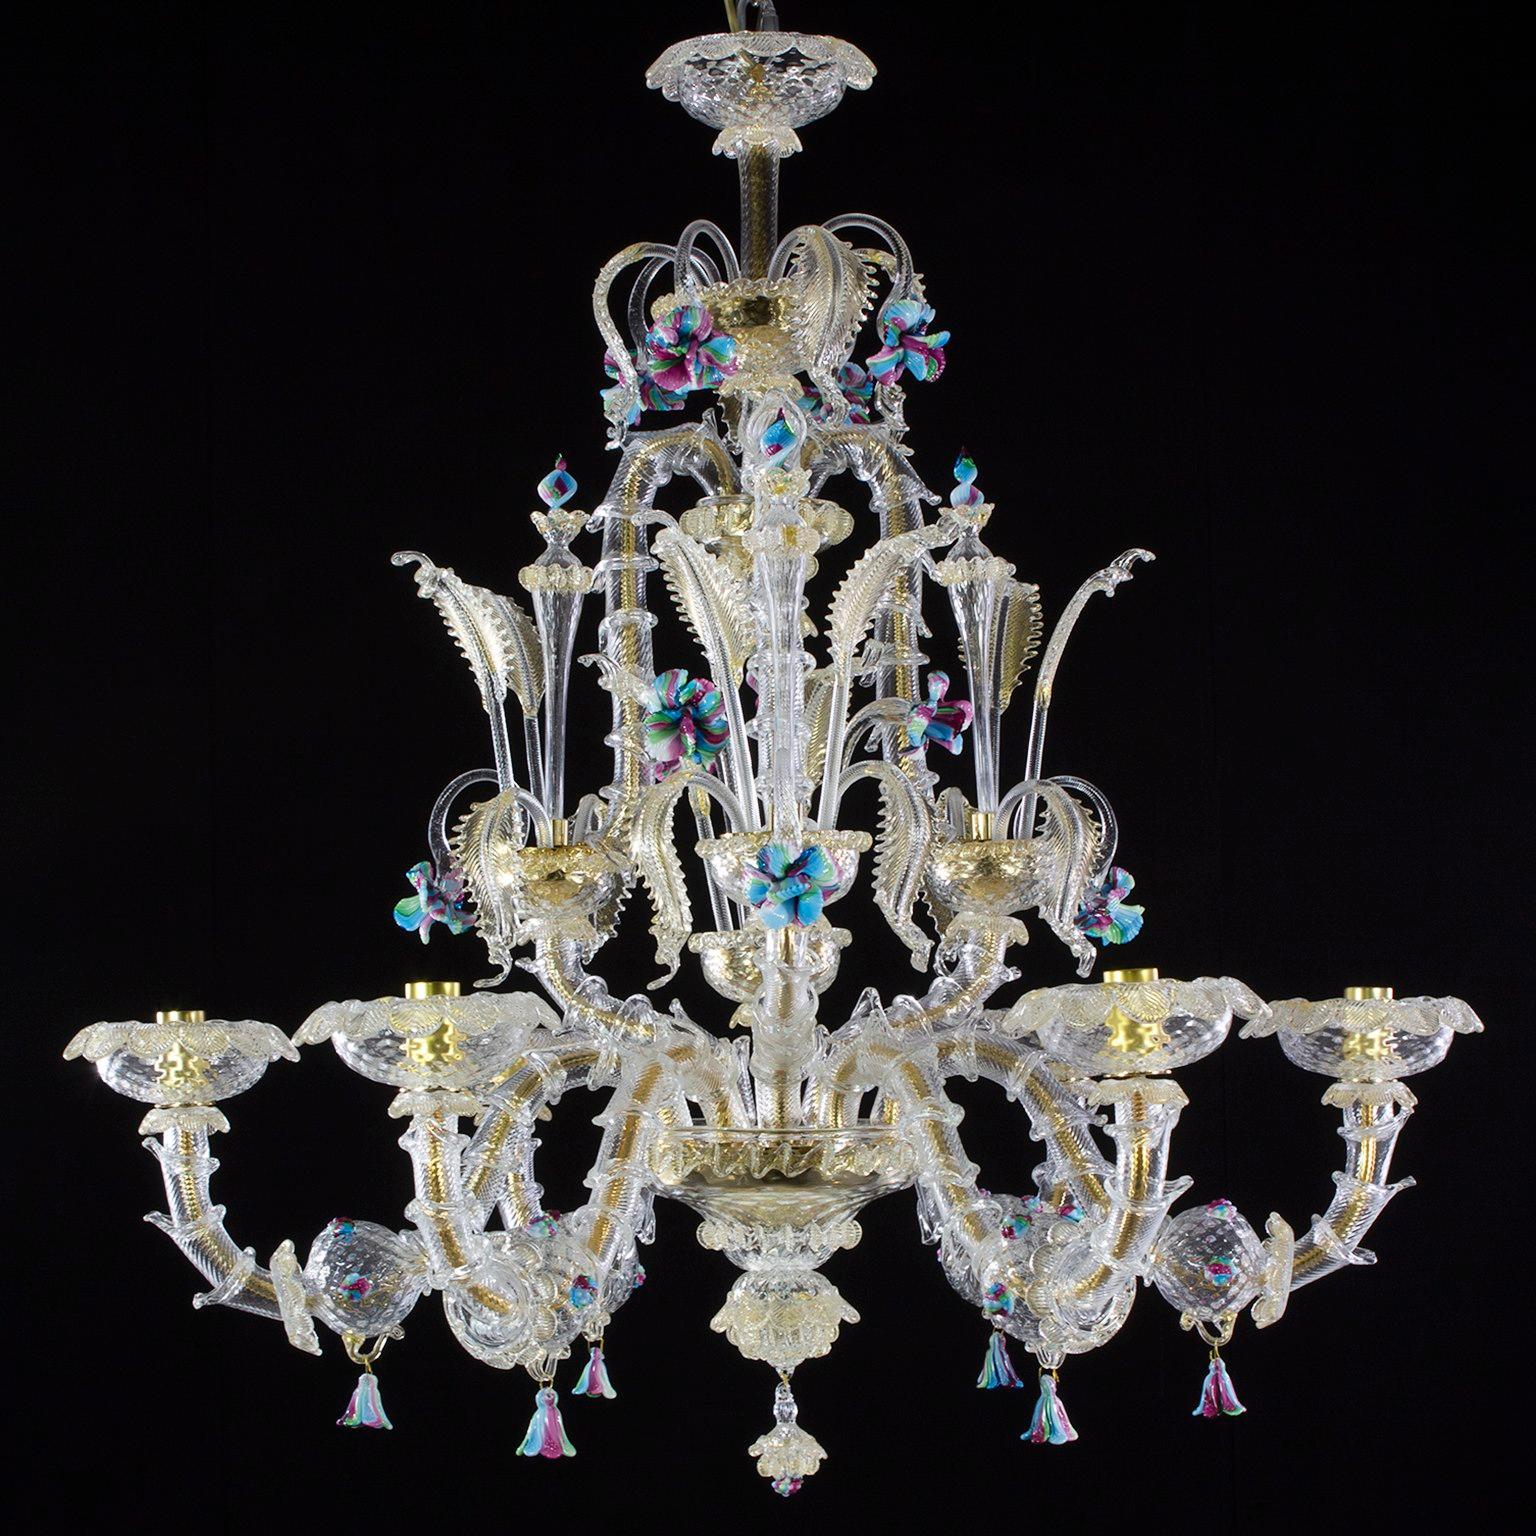 Caesar chandelier 6 arms, clear and gold, Murano glass, details and flowers in vitreous paste by Multiforme
The name, as well as the structure evokes the splendour of the past centuries. It is an evergreen model, a Classic product manufactured by